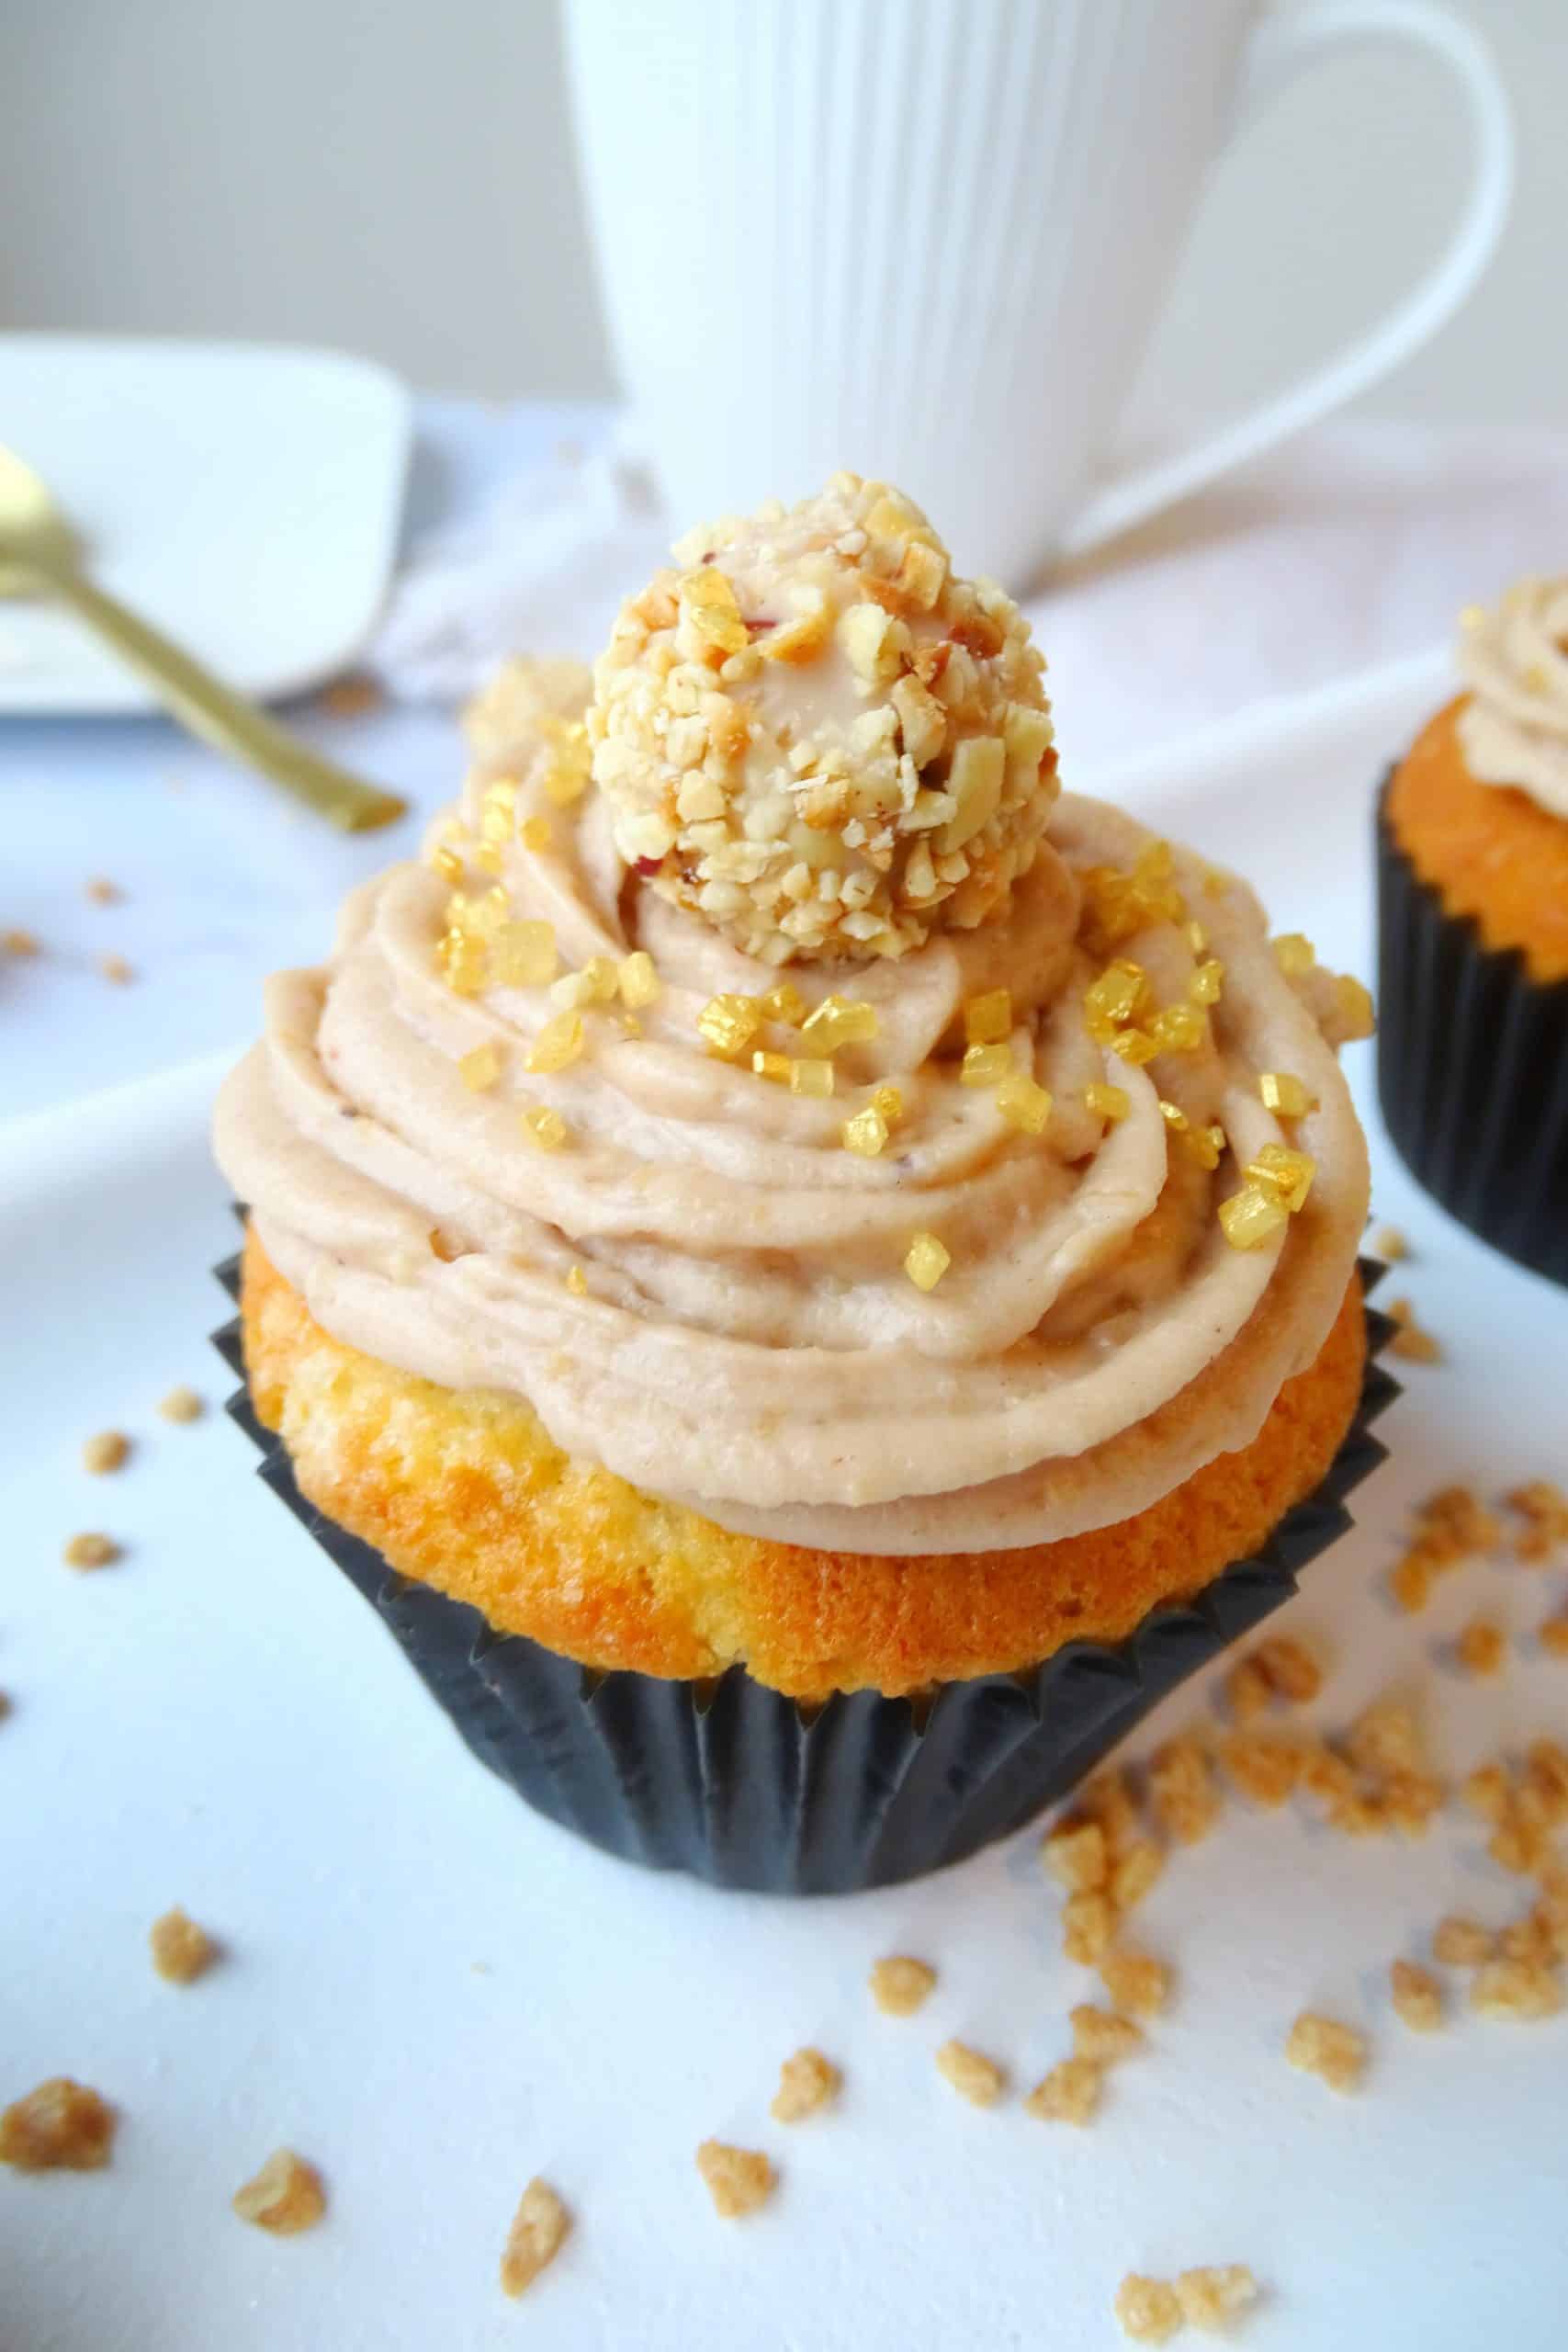 Giotto-Cupcakes mit traumhaftem Mascarpone-Topping! - Sheepysbakery